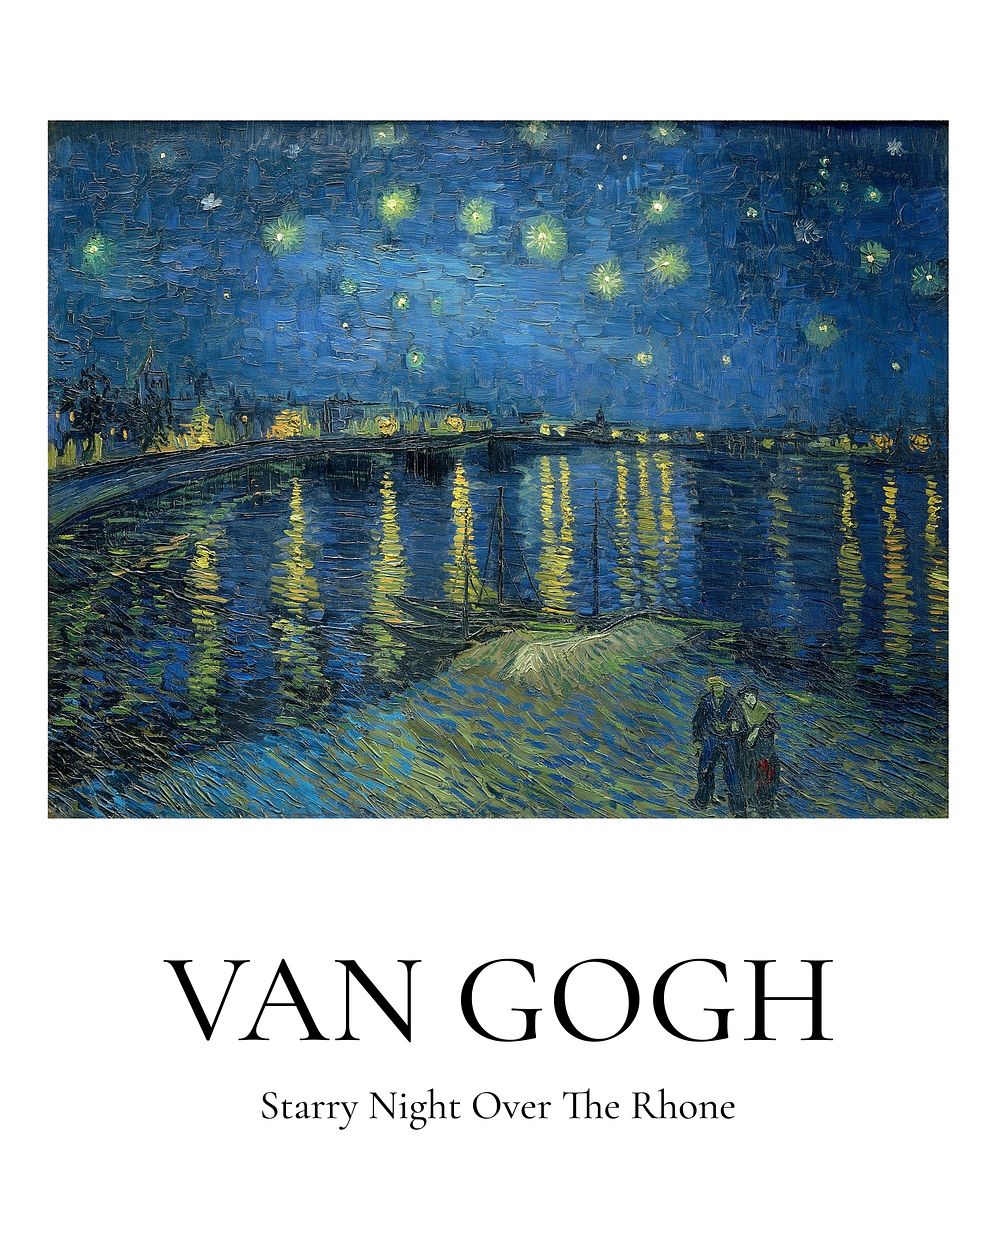 Van Gogh poster, famous painting Starry Night Over the Rhone wall art print decor.